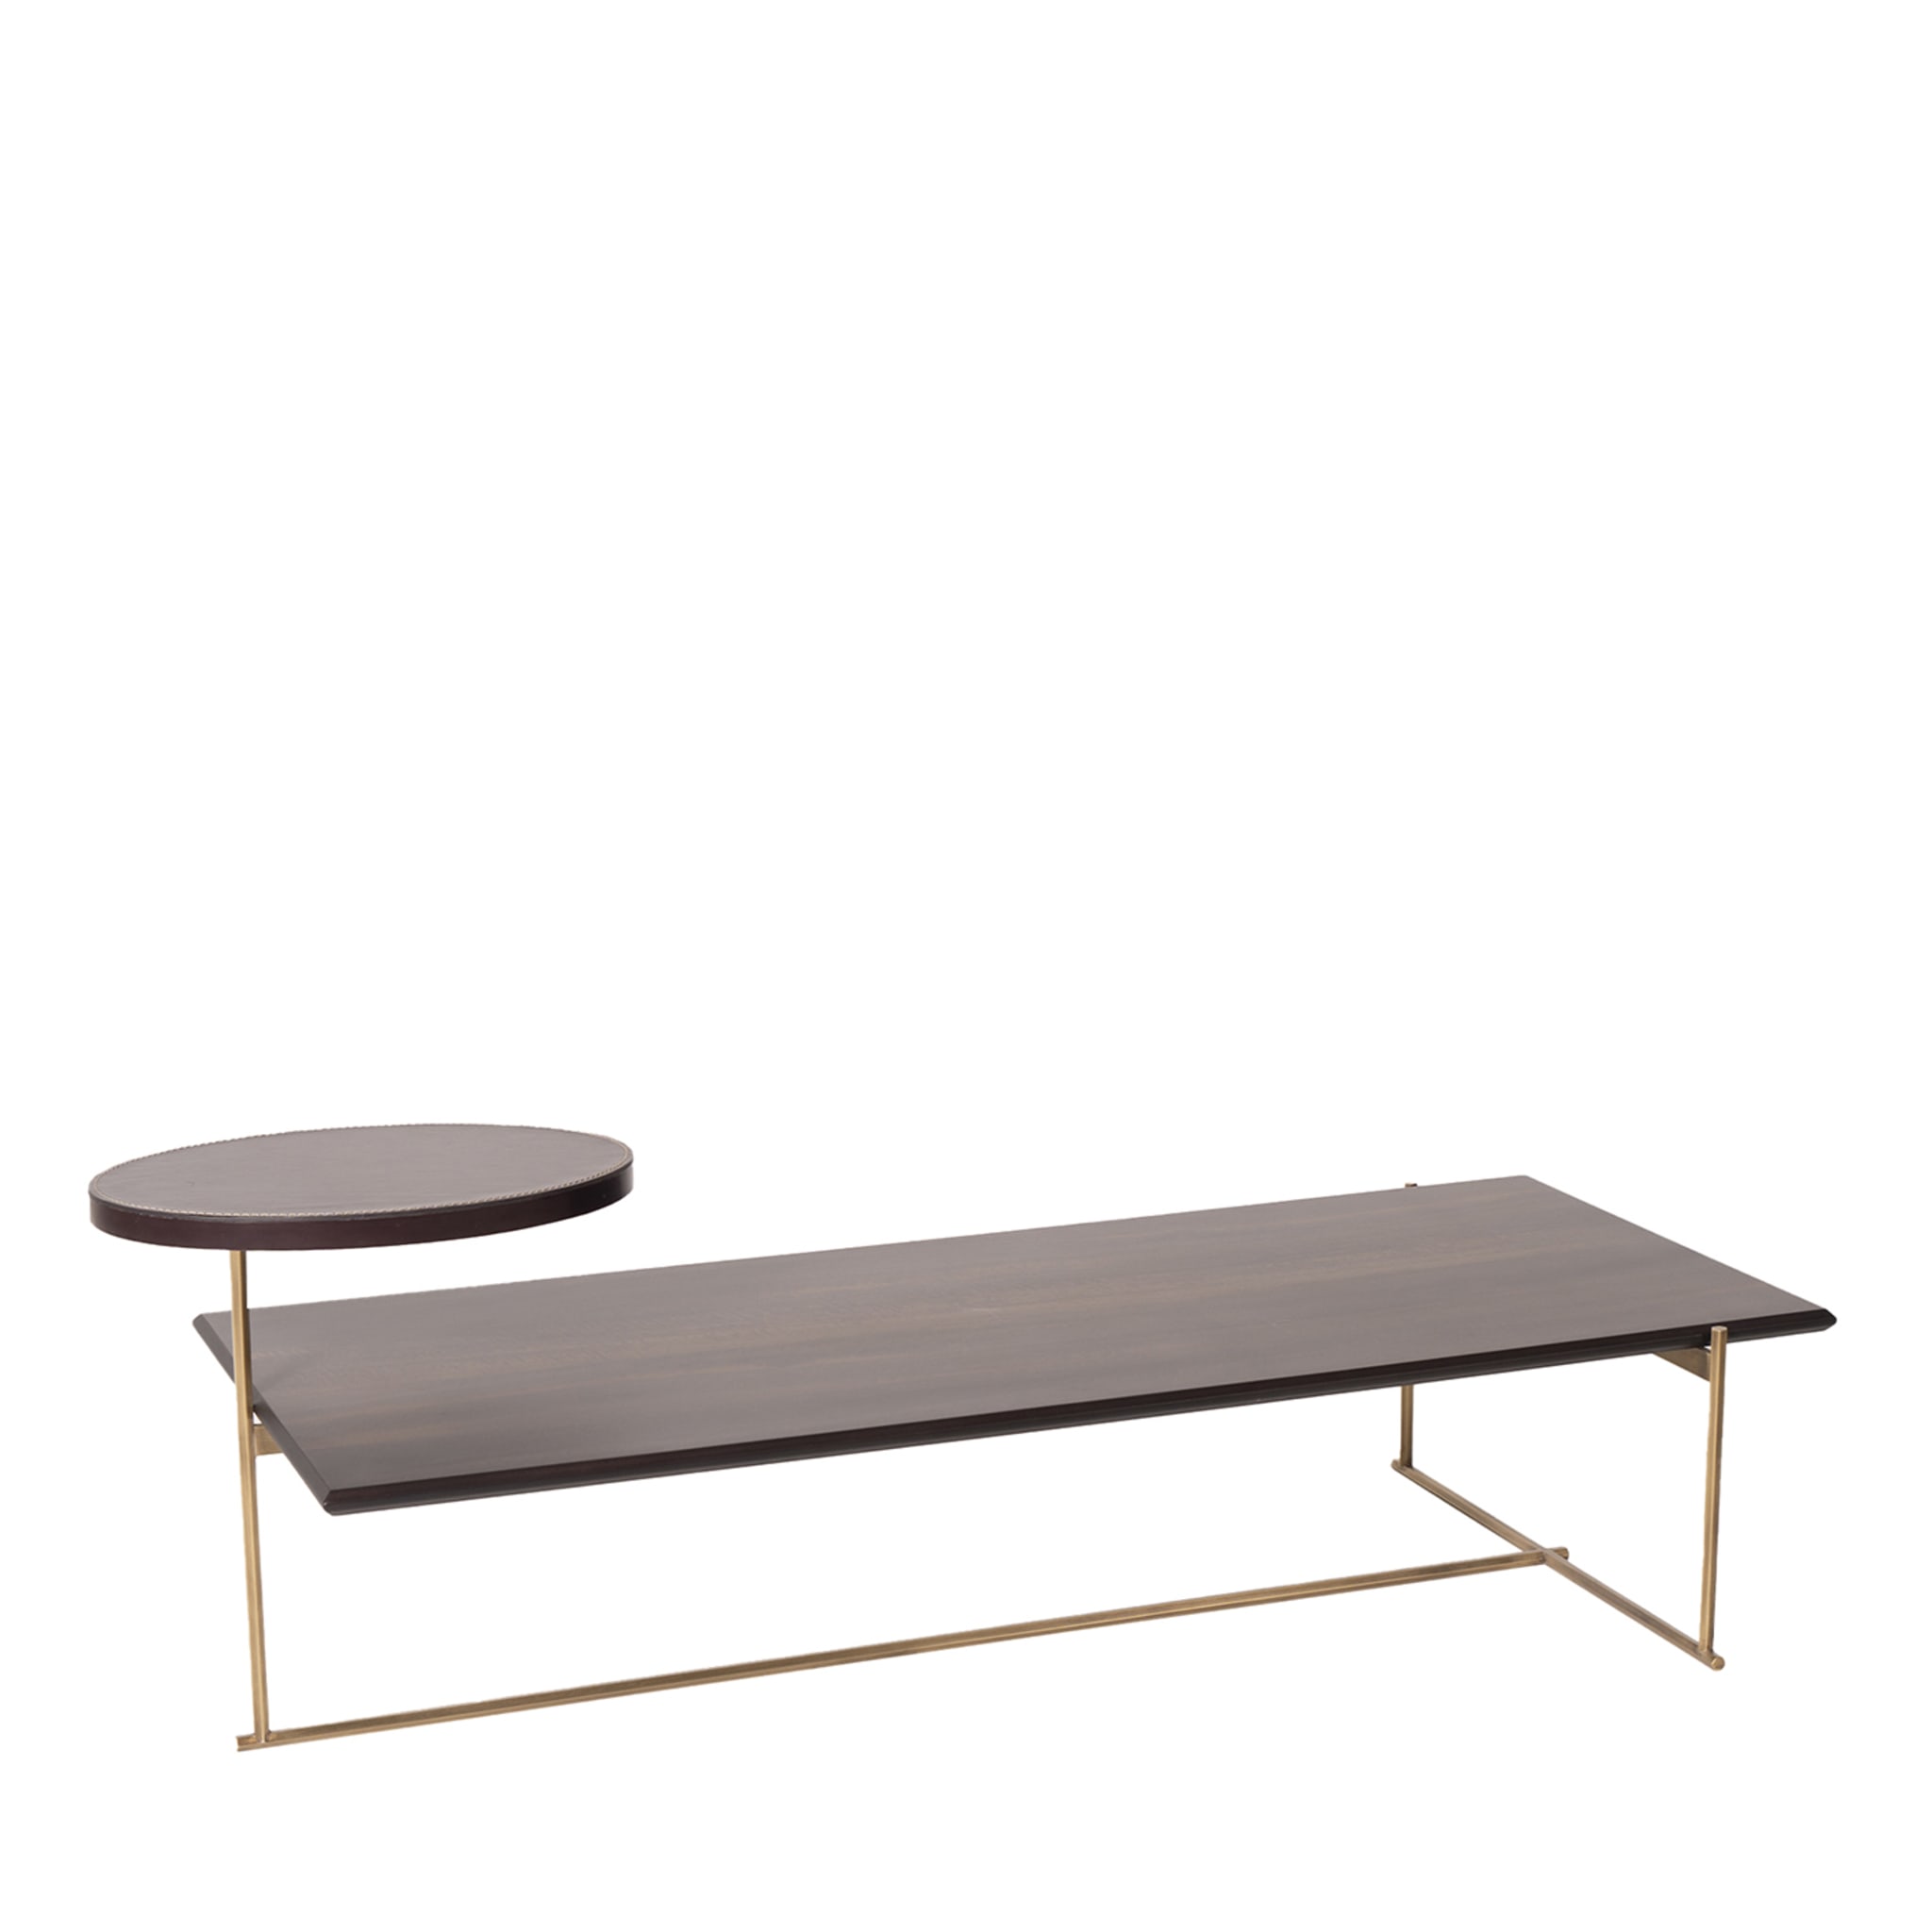 Skyline Coffee Table by Marco and Giulio Mantellassi - Main view